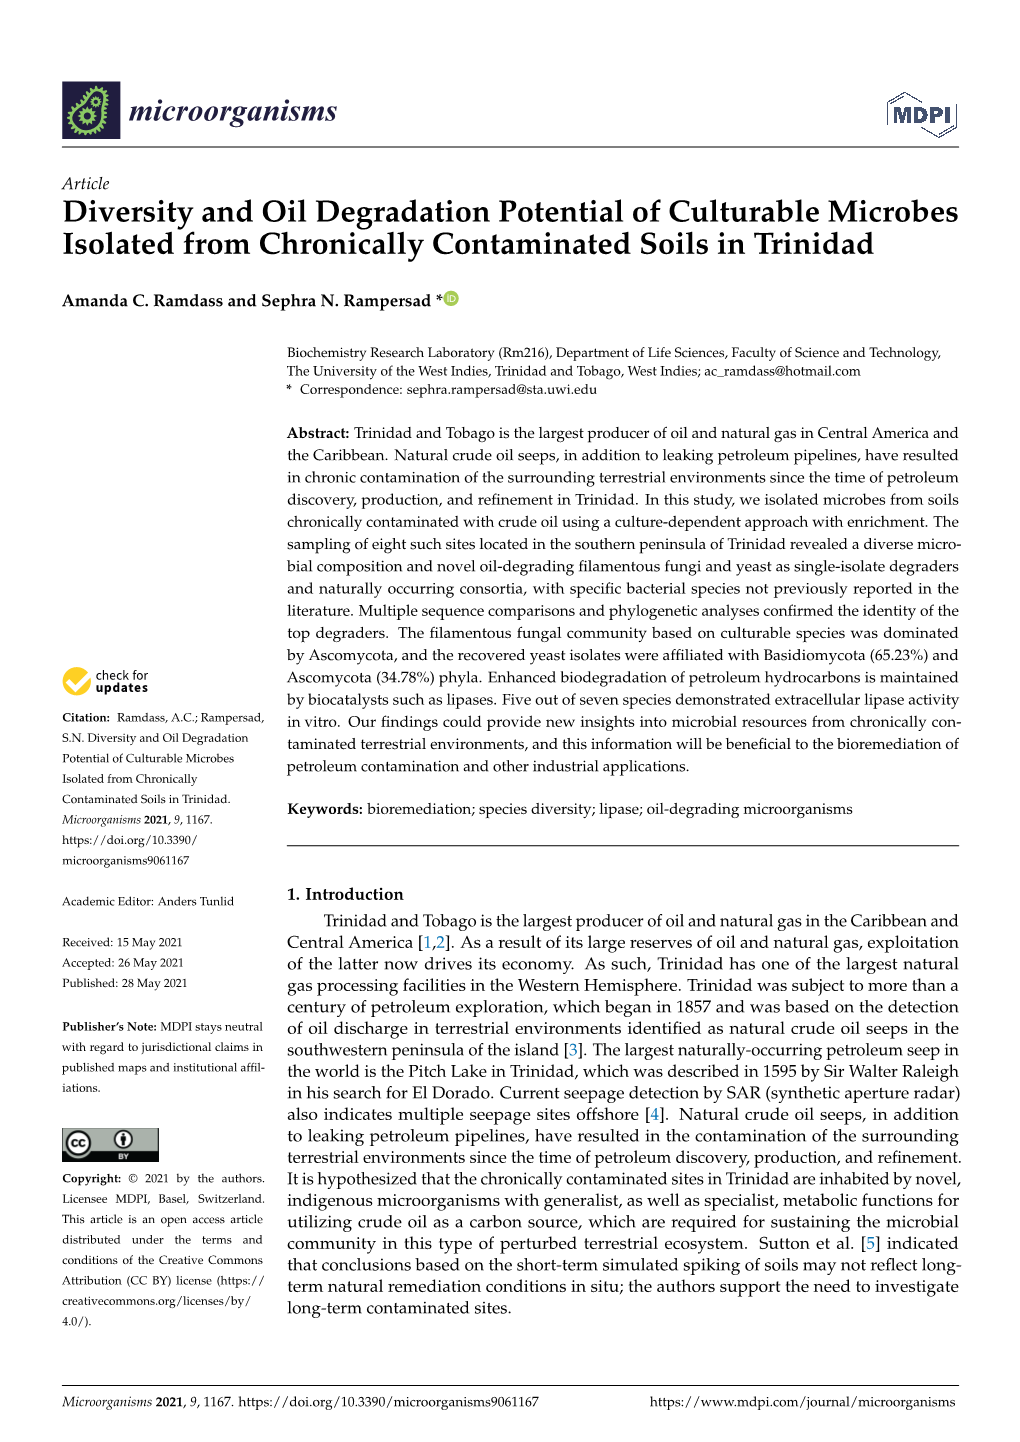 Diversity and Oil Degradation Potential of Culturable Microbes Isolated from Chronically Contaminated Soils in Trinidad